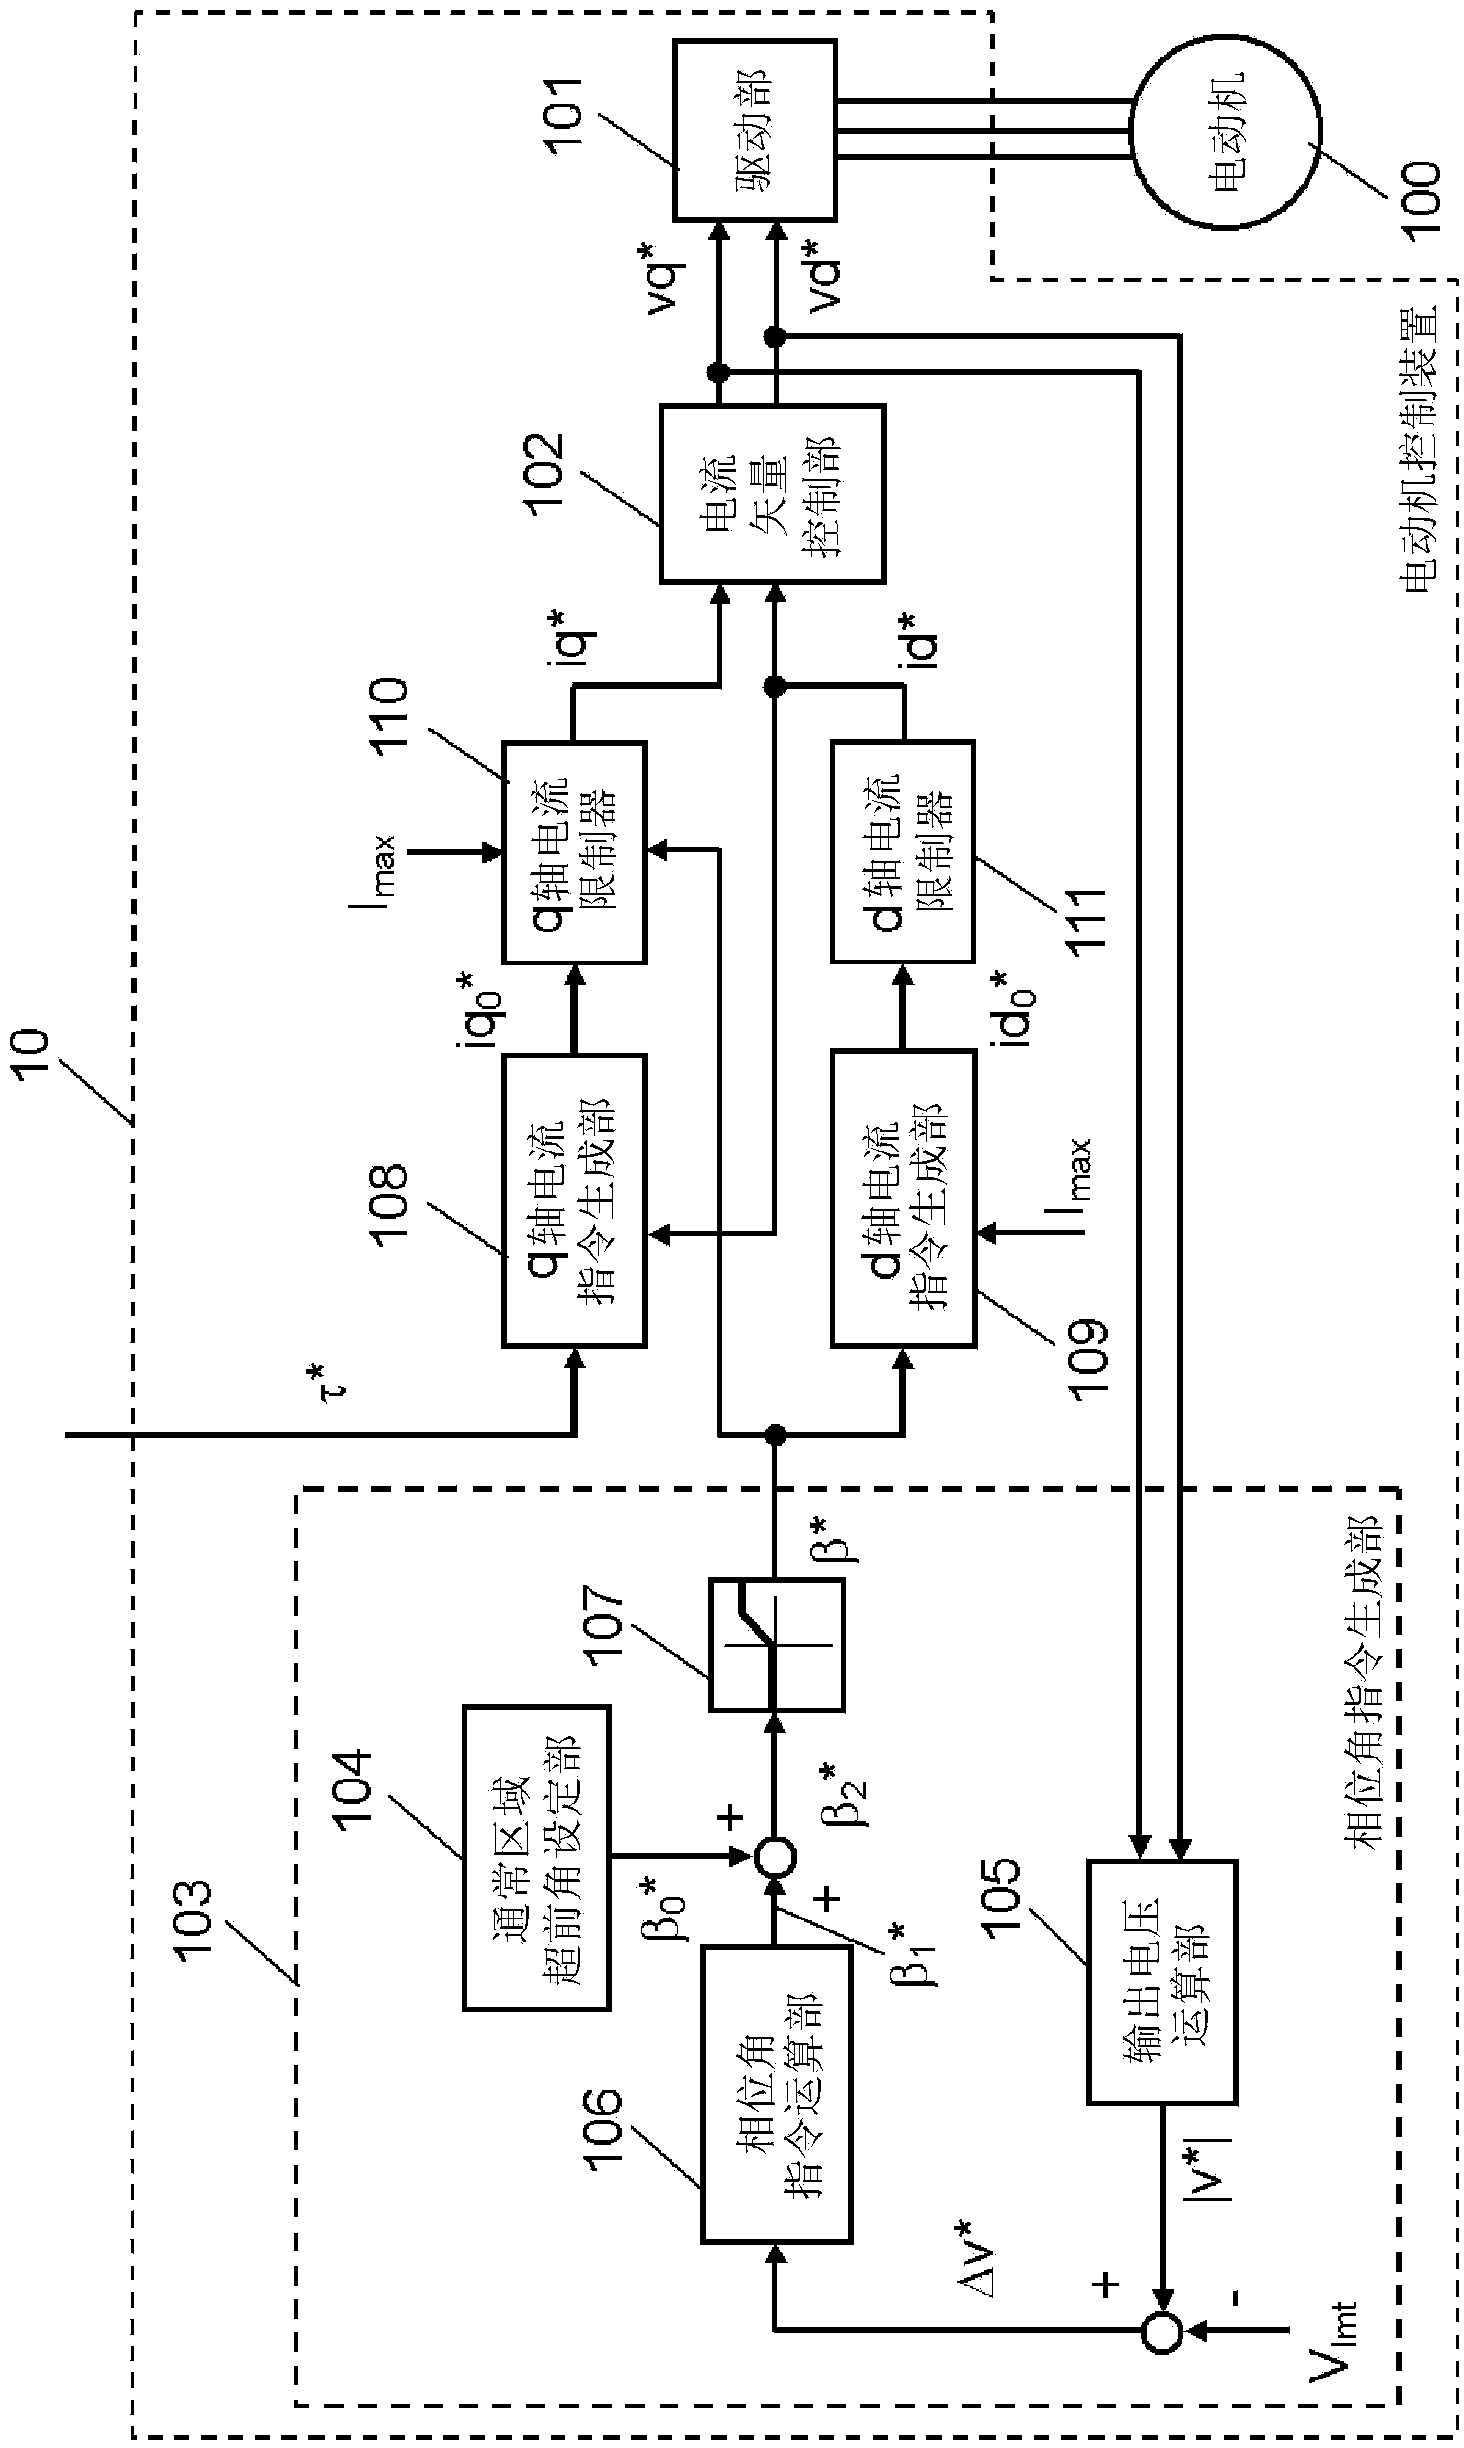 Electric motor control device